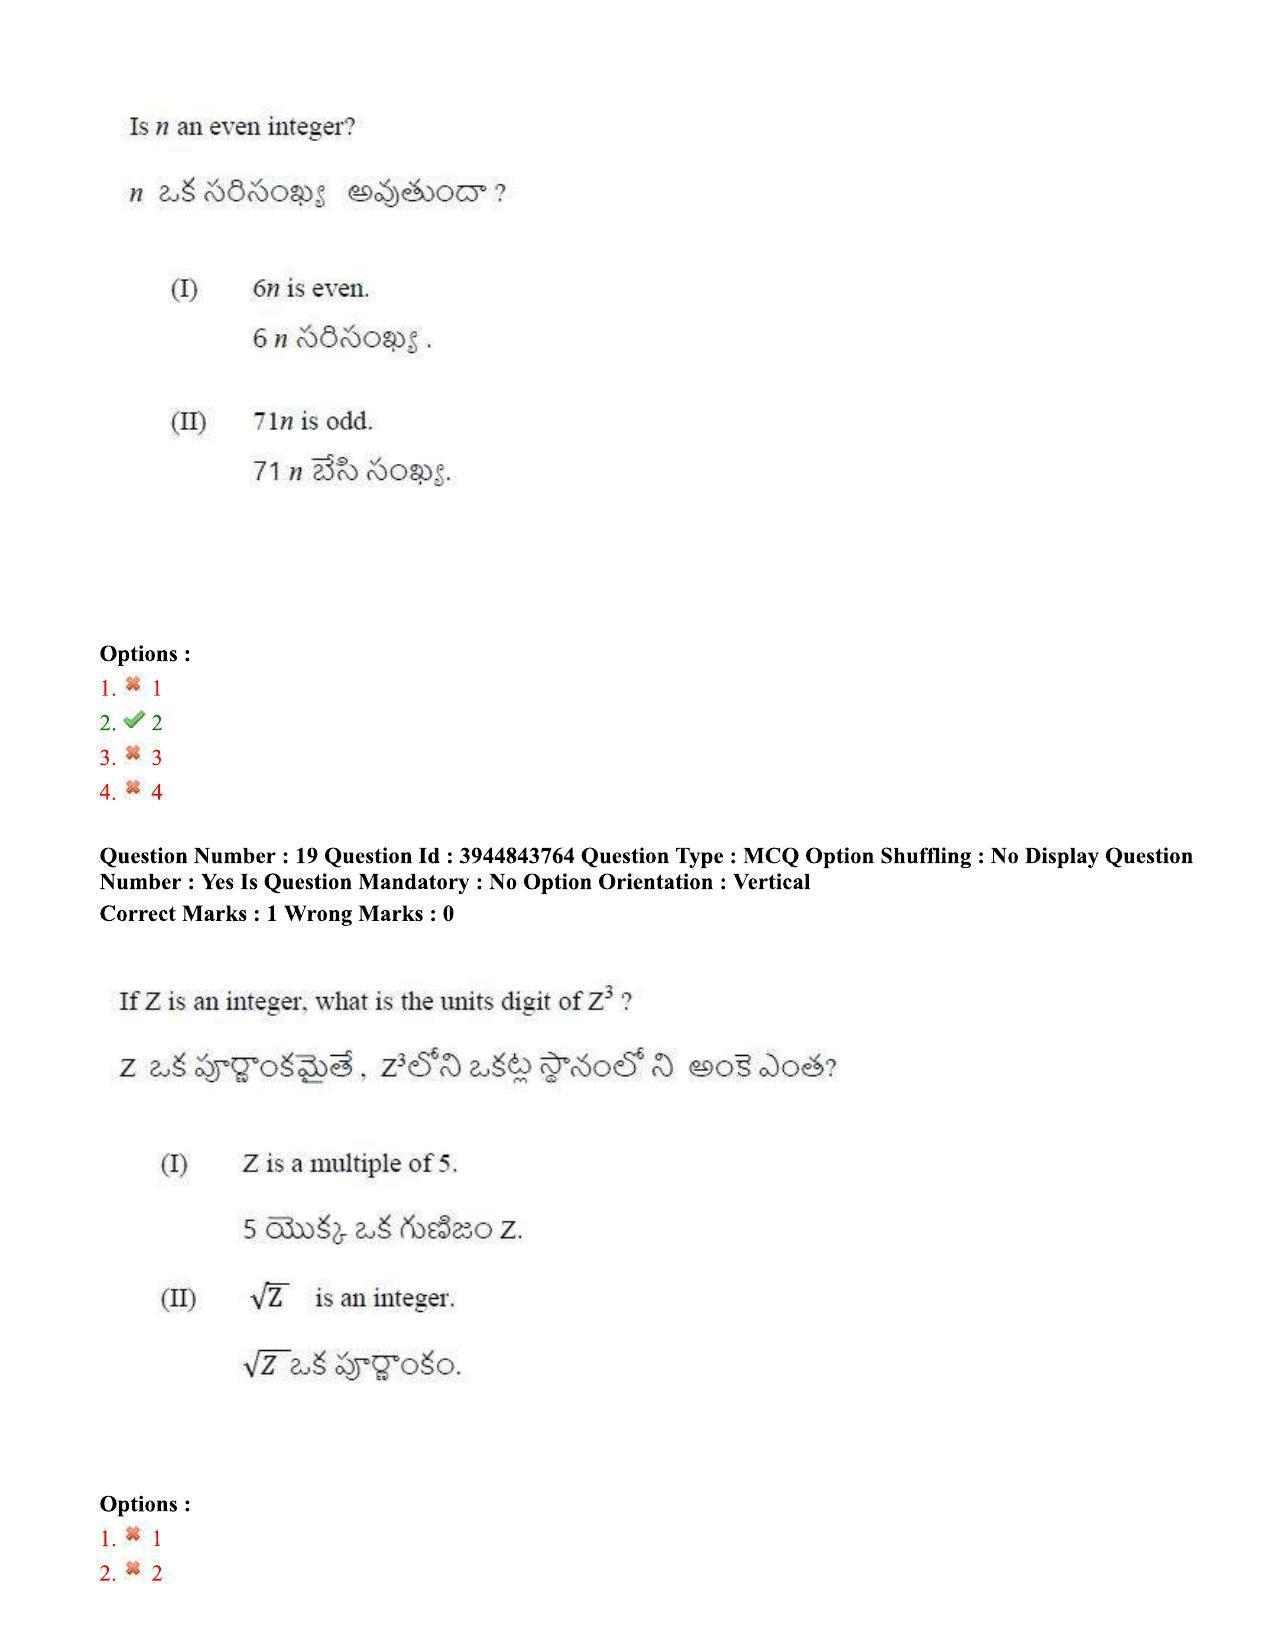 TS ICET 2020 Question Paper 1 - Oct 1, 2020	 - Page 15